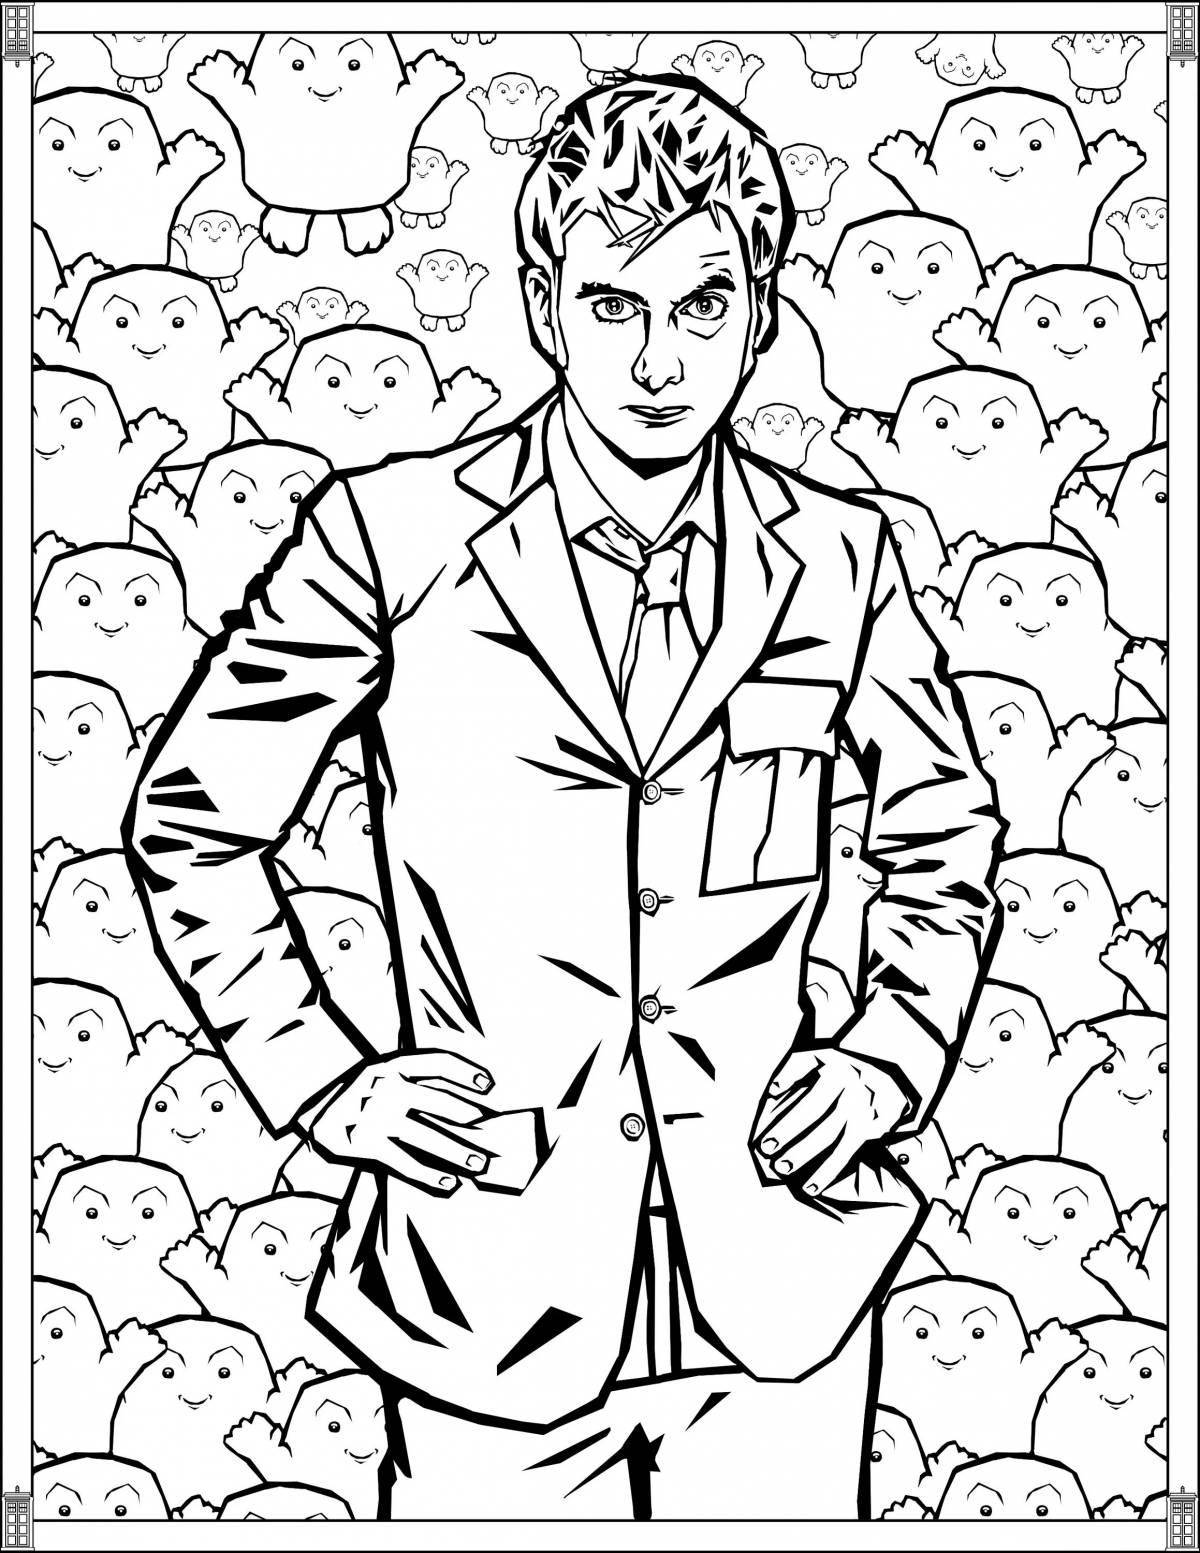 Bright doctor who coloring book